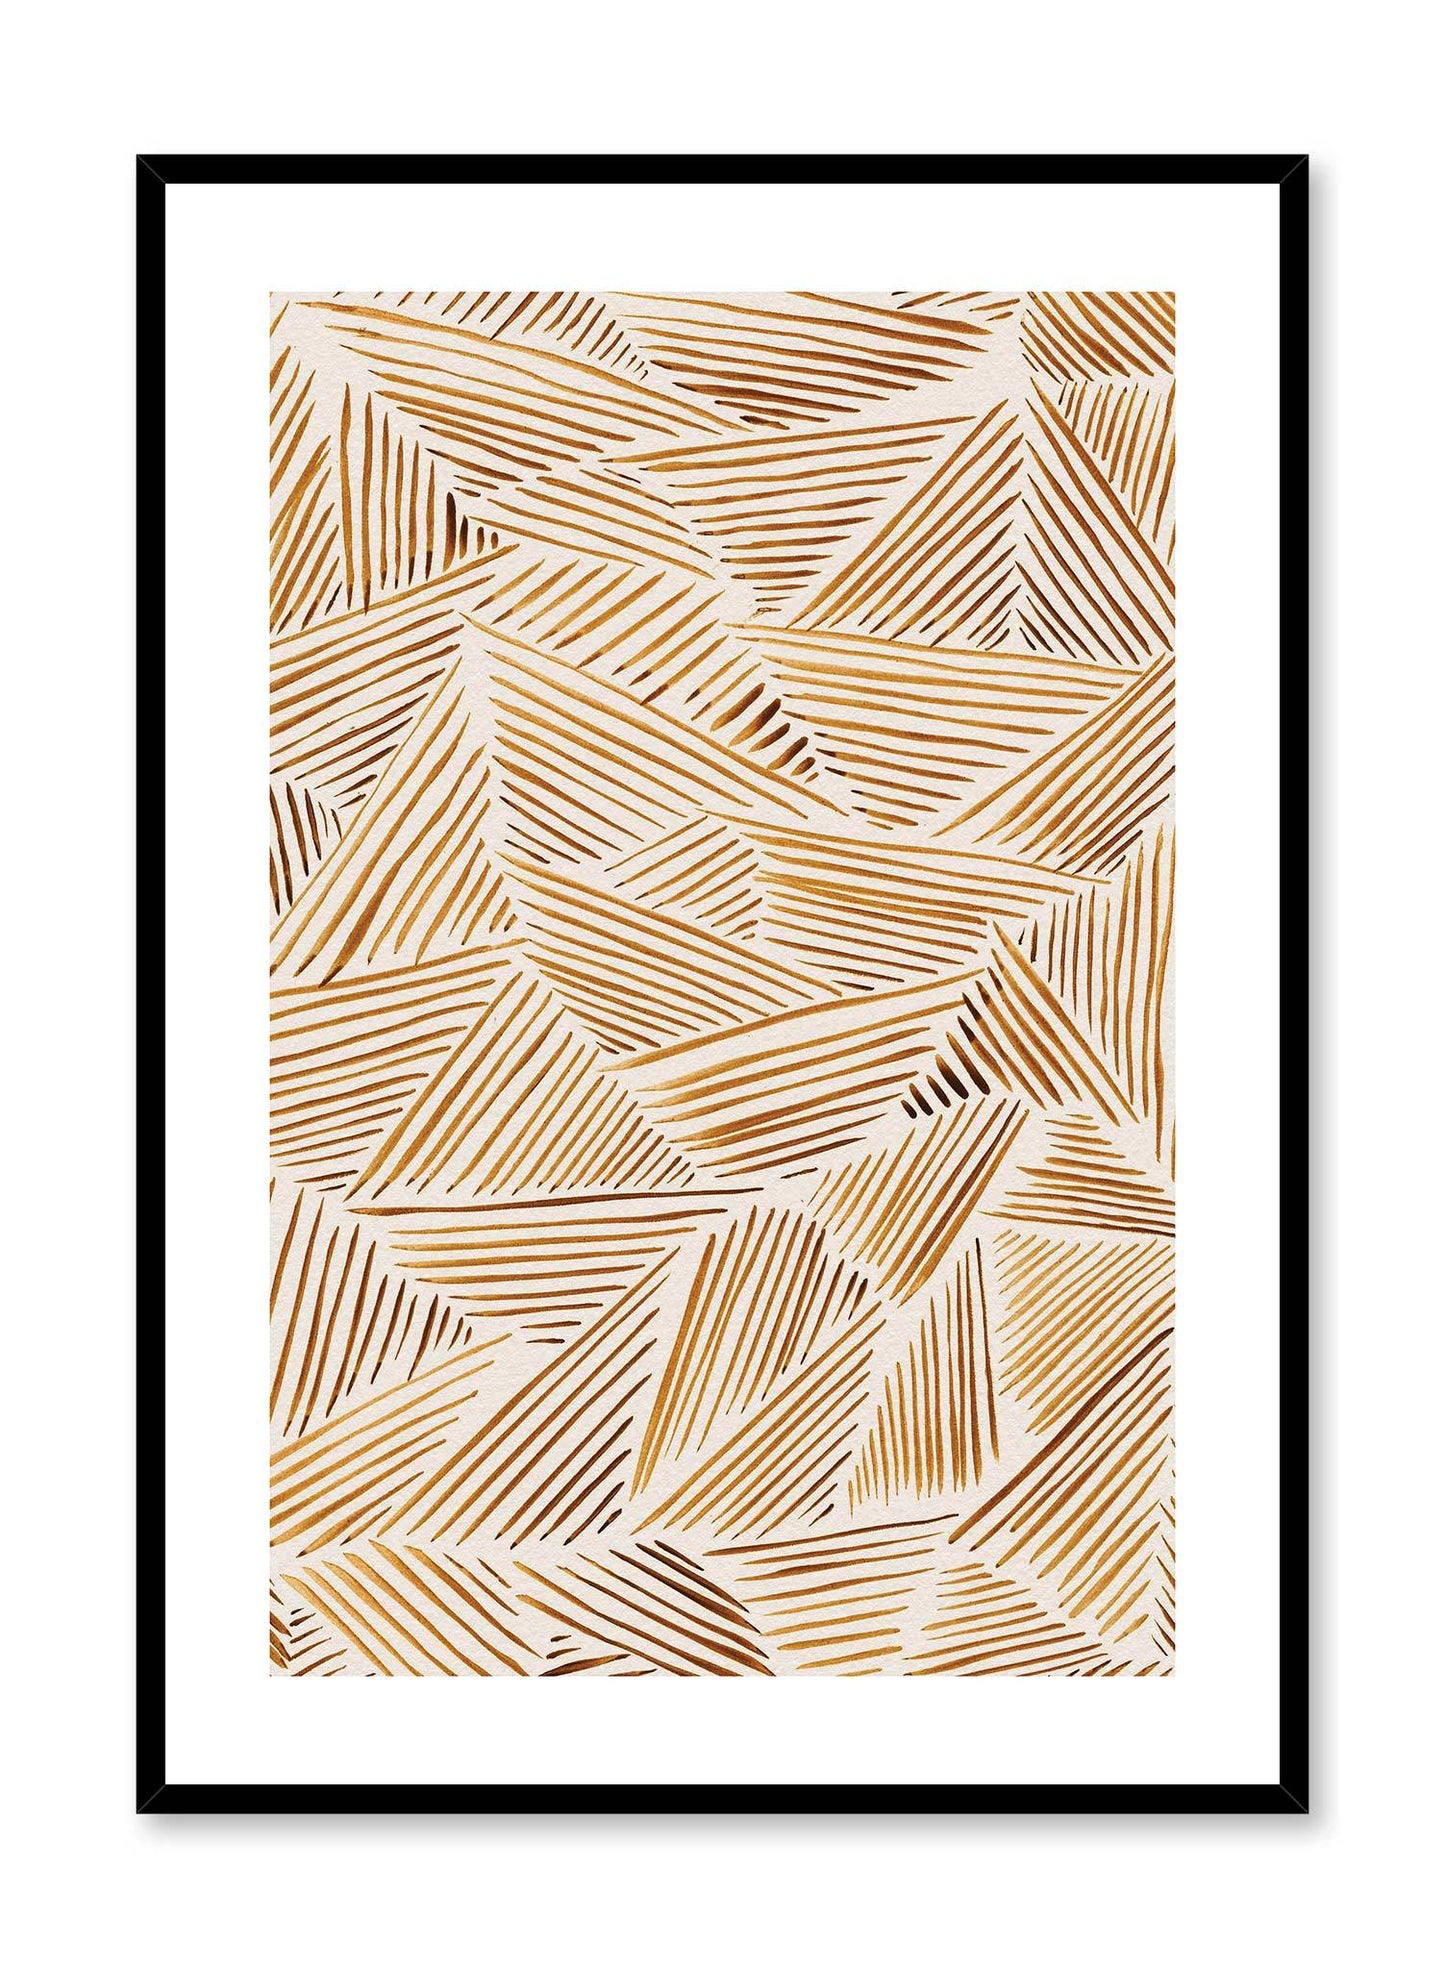 Wicker is a minimalist abstract illustration of a superposition of orange striped triangles in various directions by Opposite Wall.